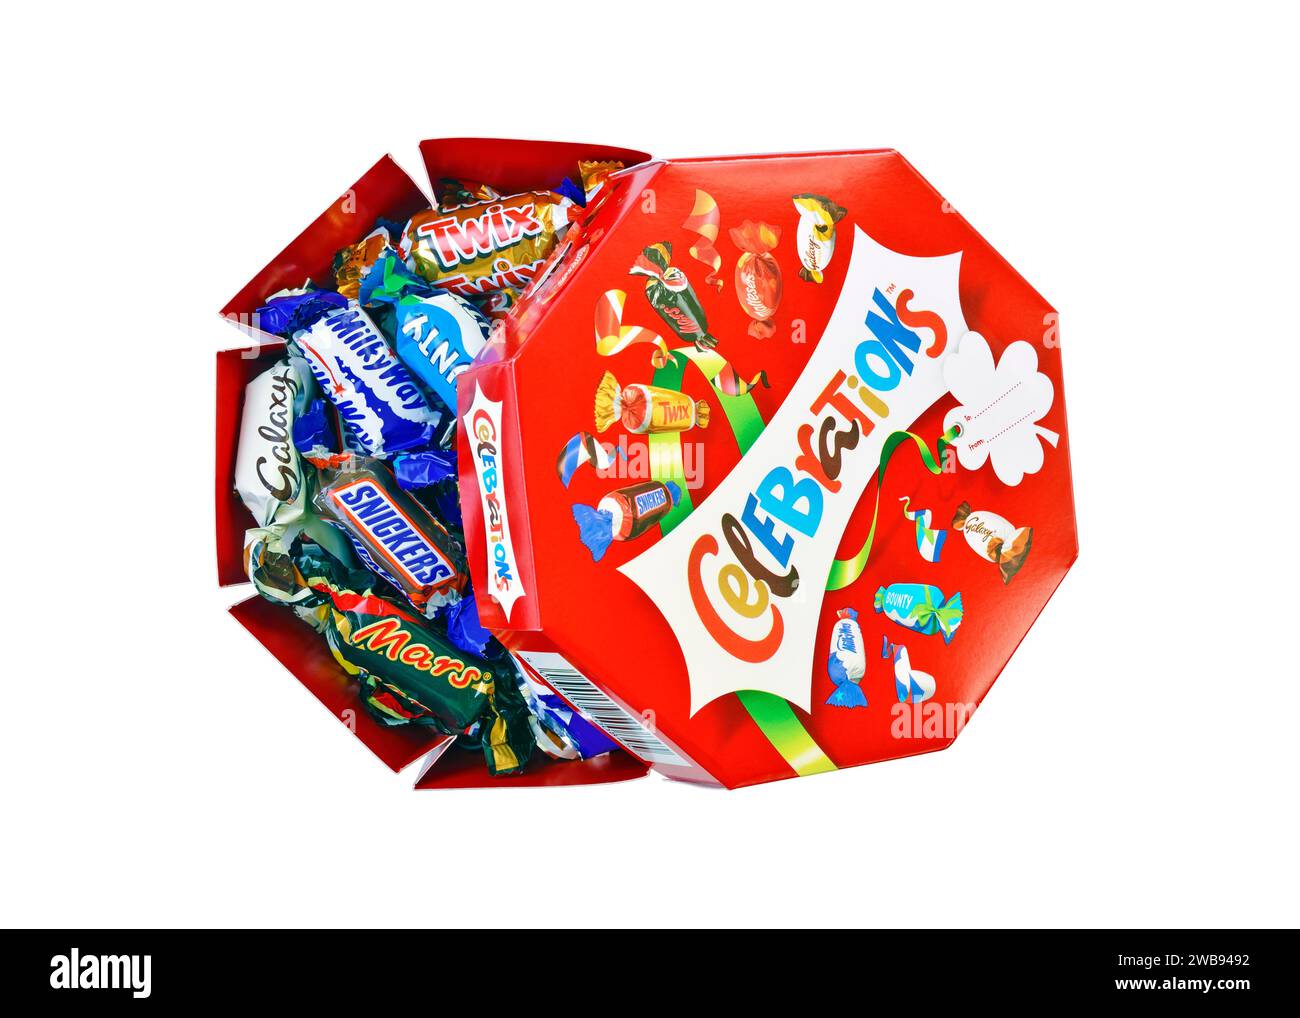 Celebrations Chocolates comprising of miniature versions of full size Mars brands Stock Photo